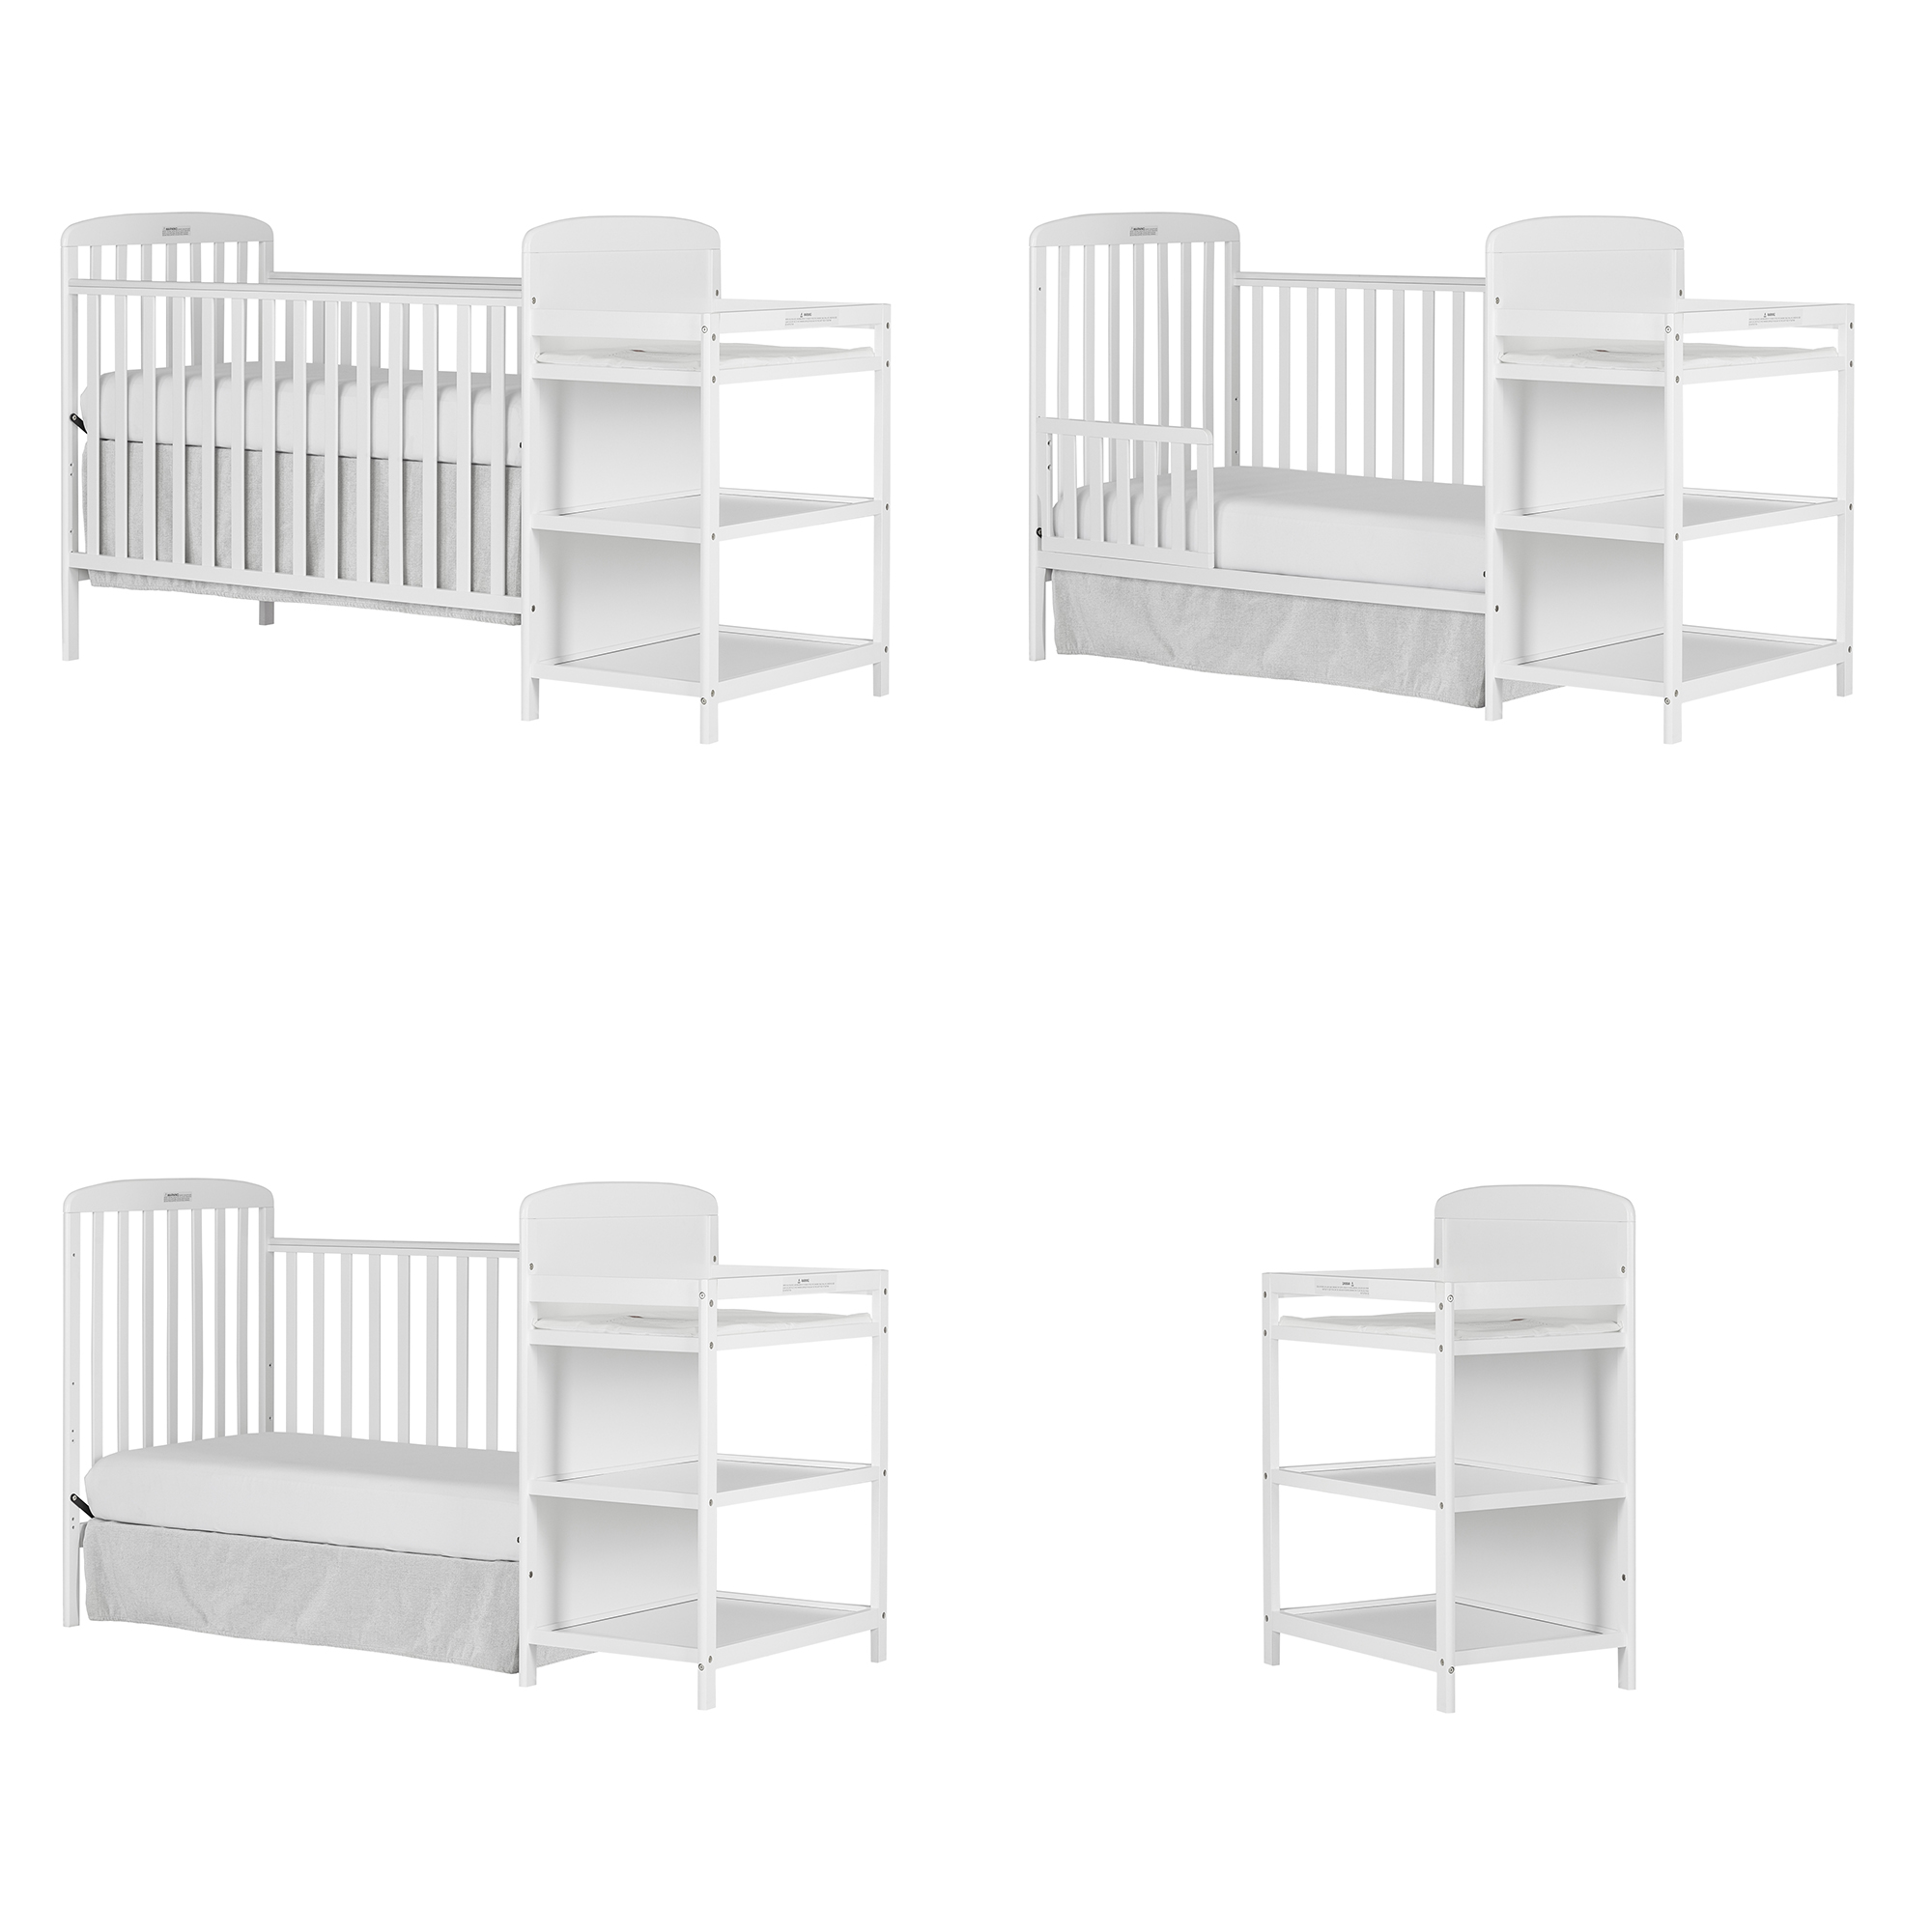 Dream On Me Anna 3-in-1 Full Size Crib and Changing Table Combo in White - image 4 of 16